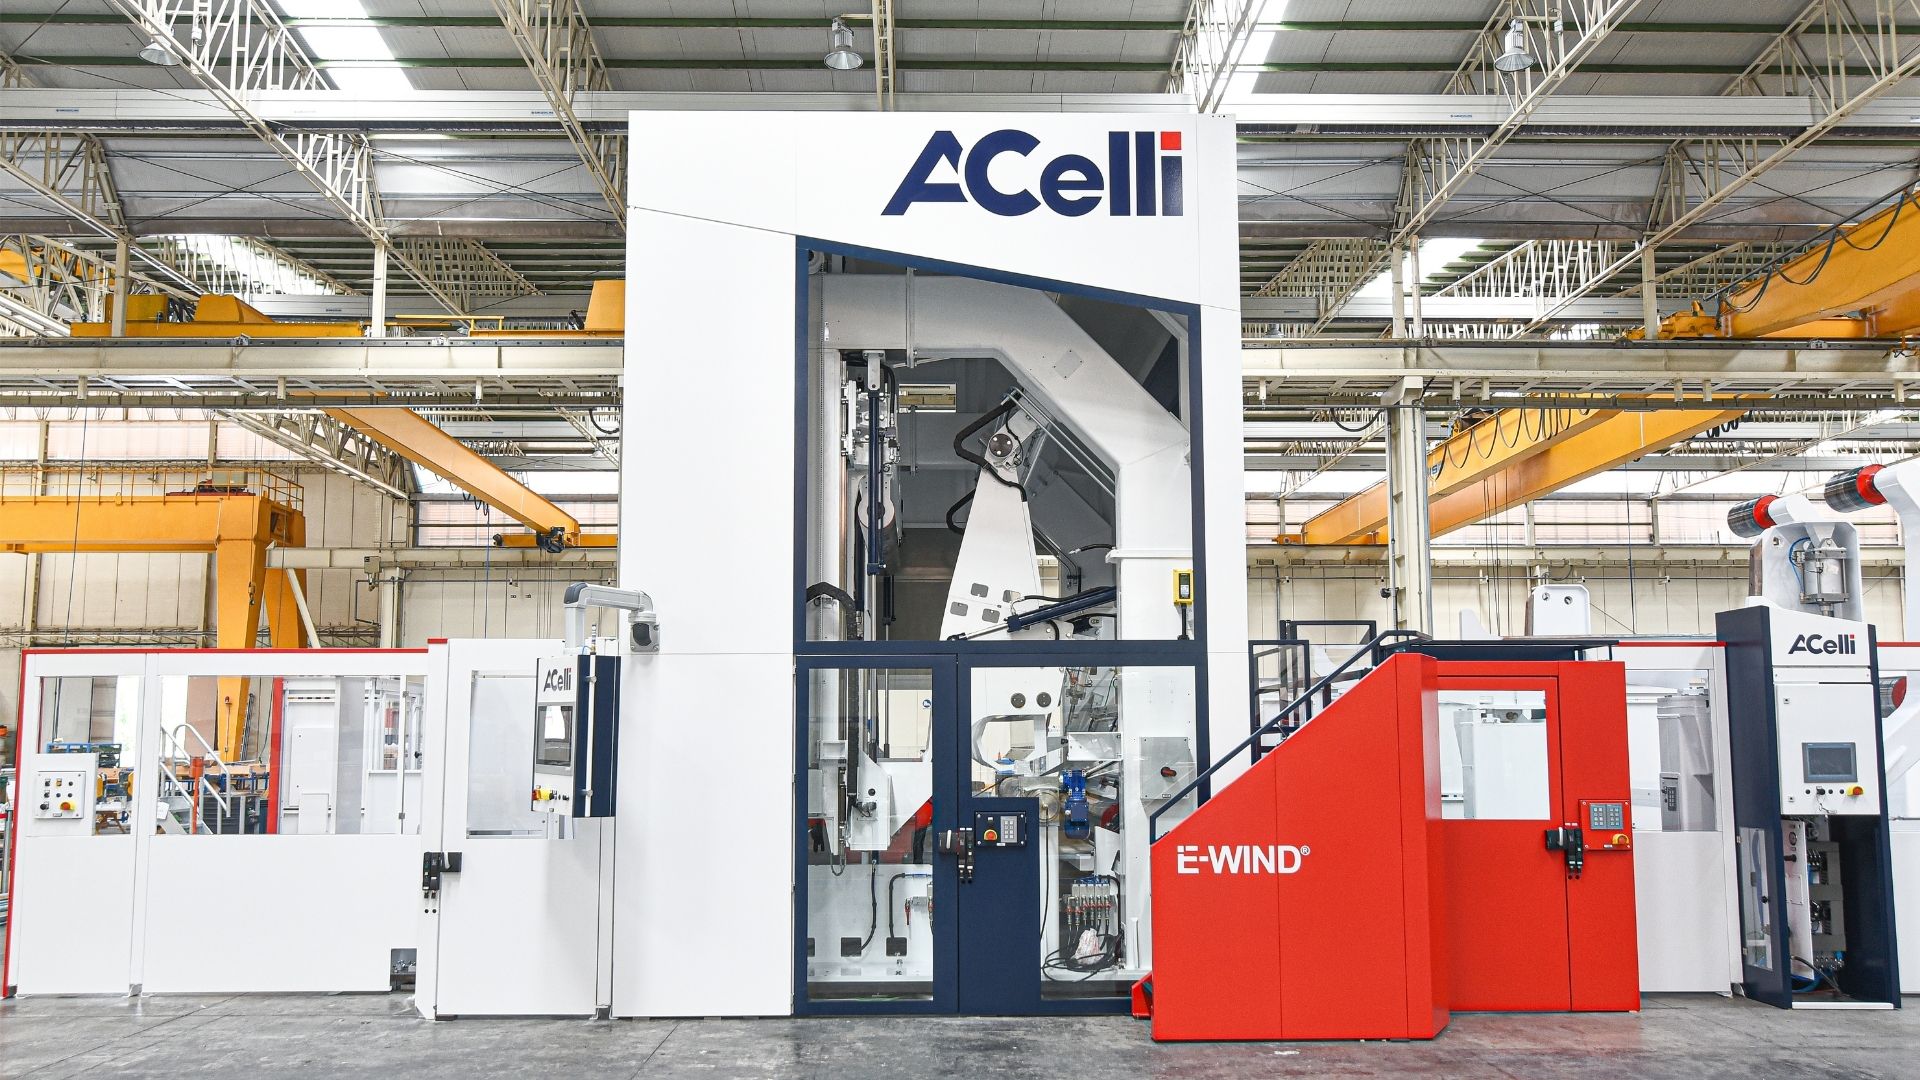 The advantages of the A.Celli E-WIND® product range